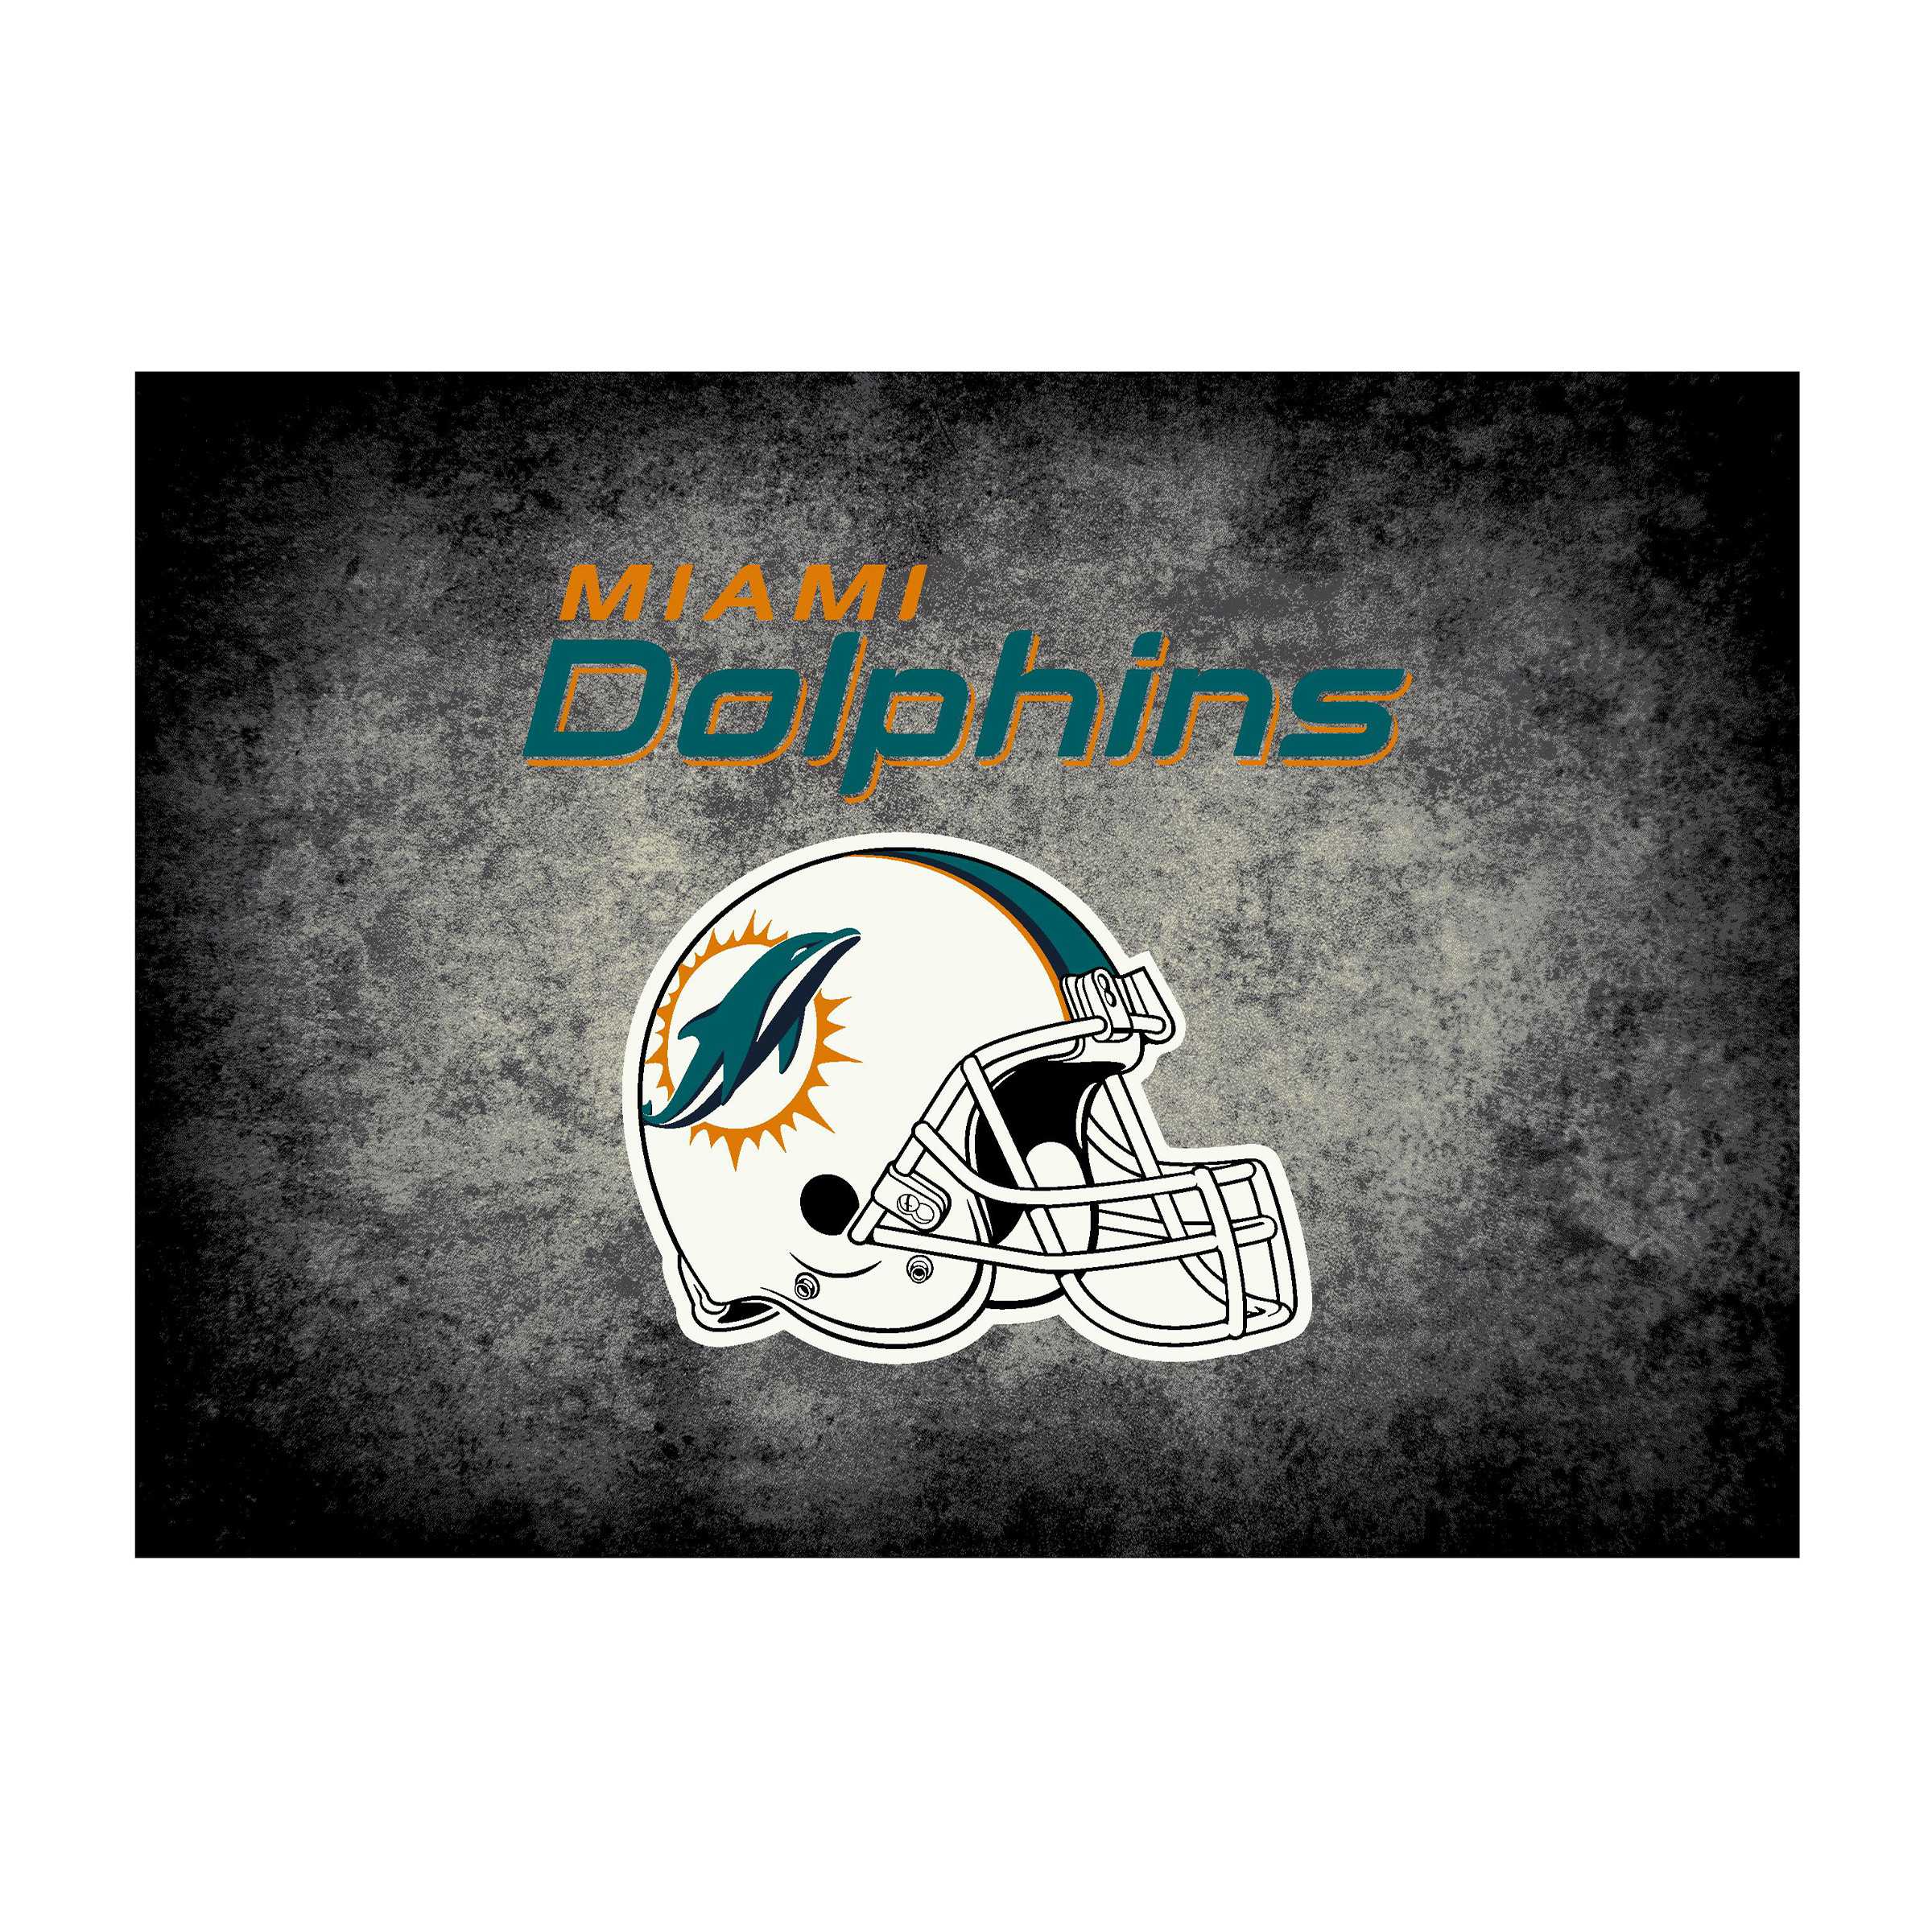 MIAMI DOLPHINS 8X11 DISTRESSED RUG